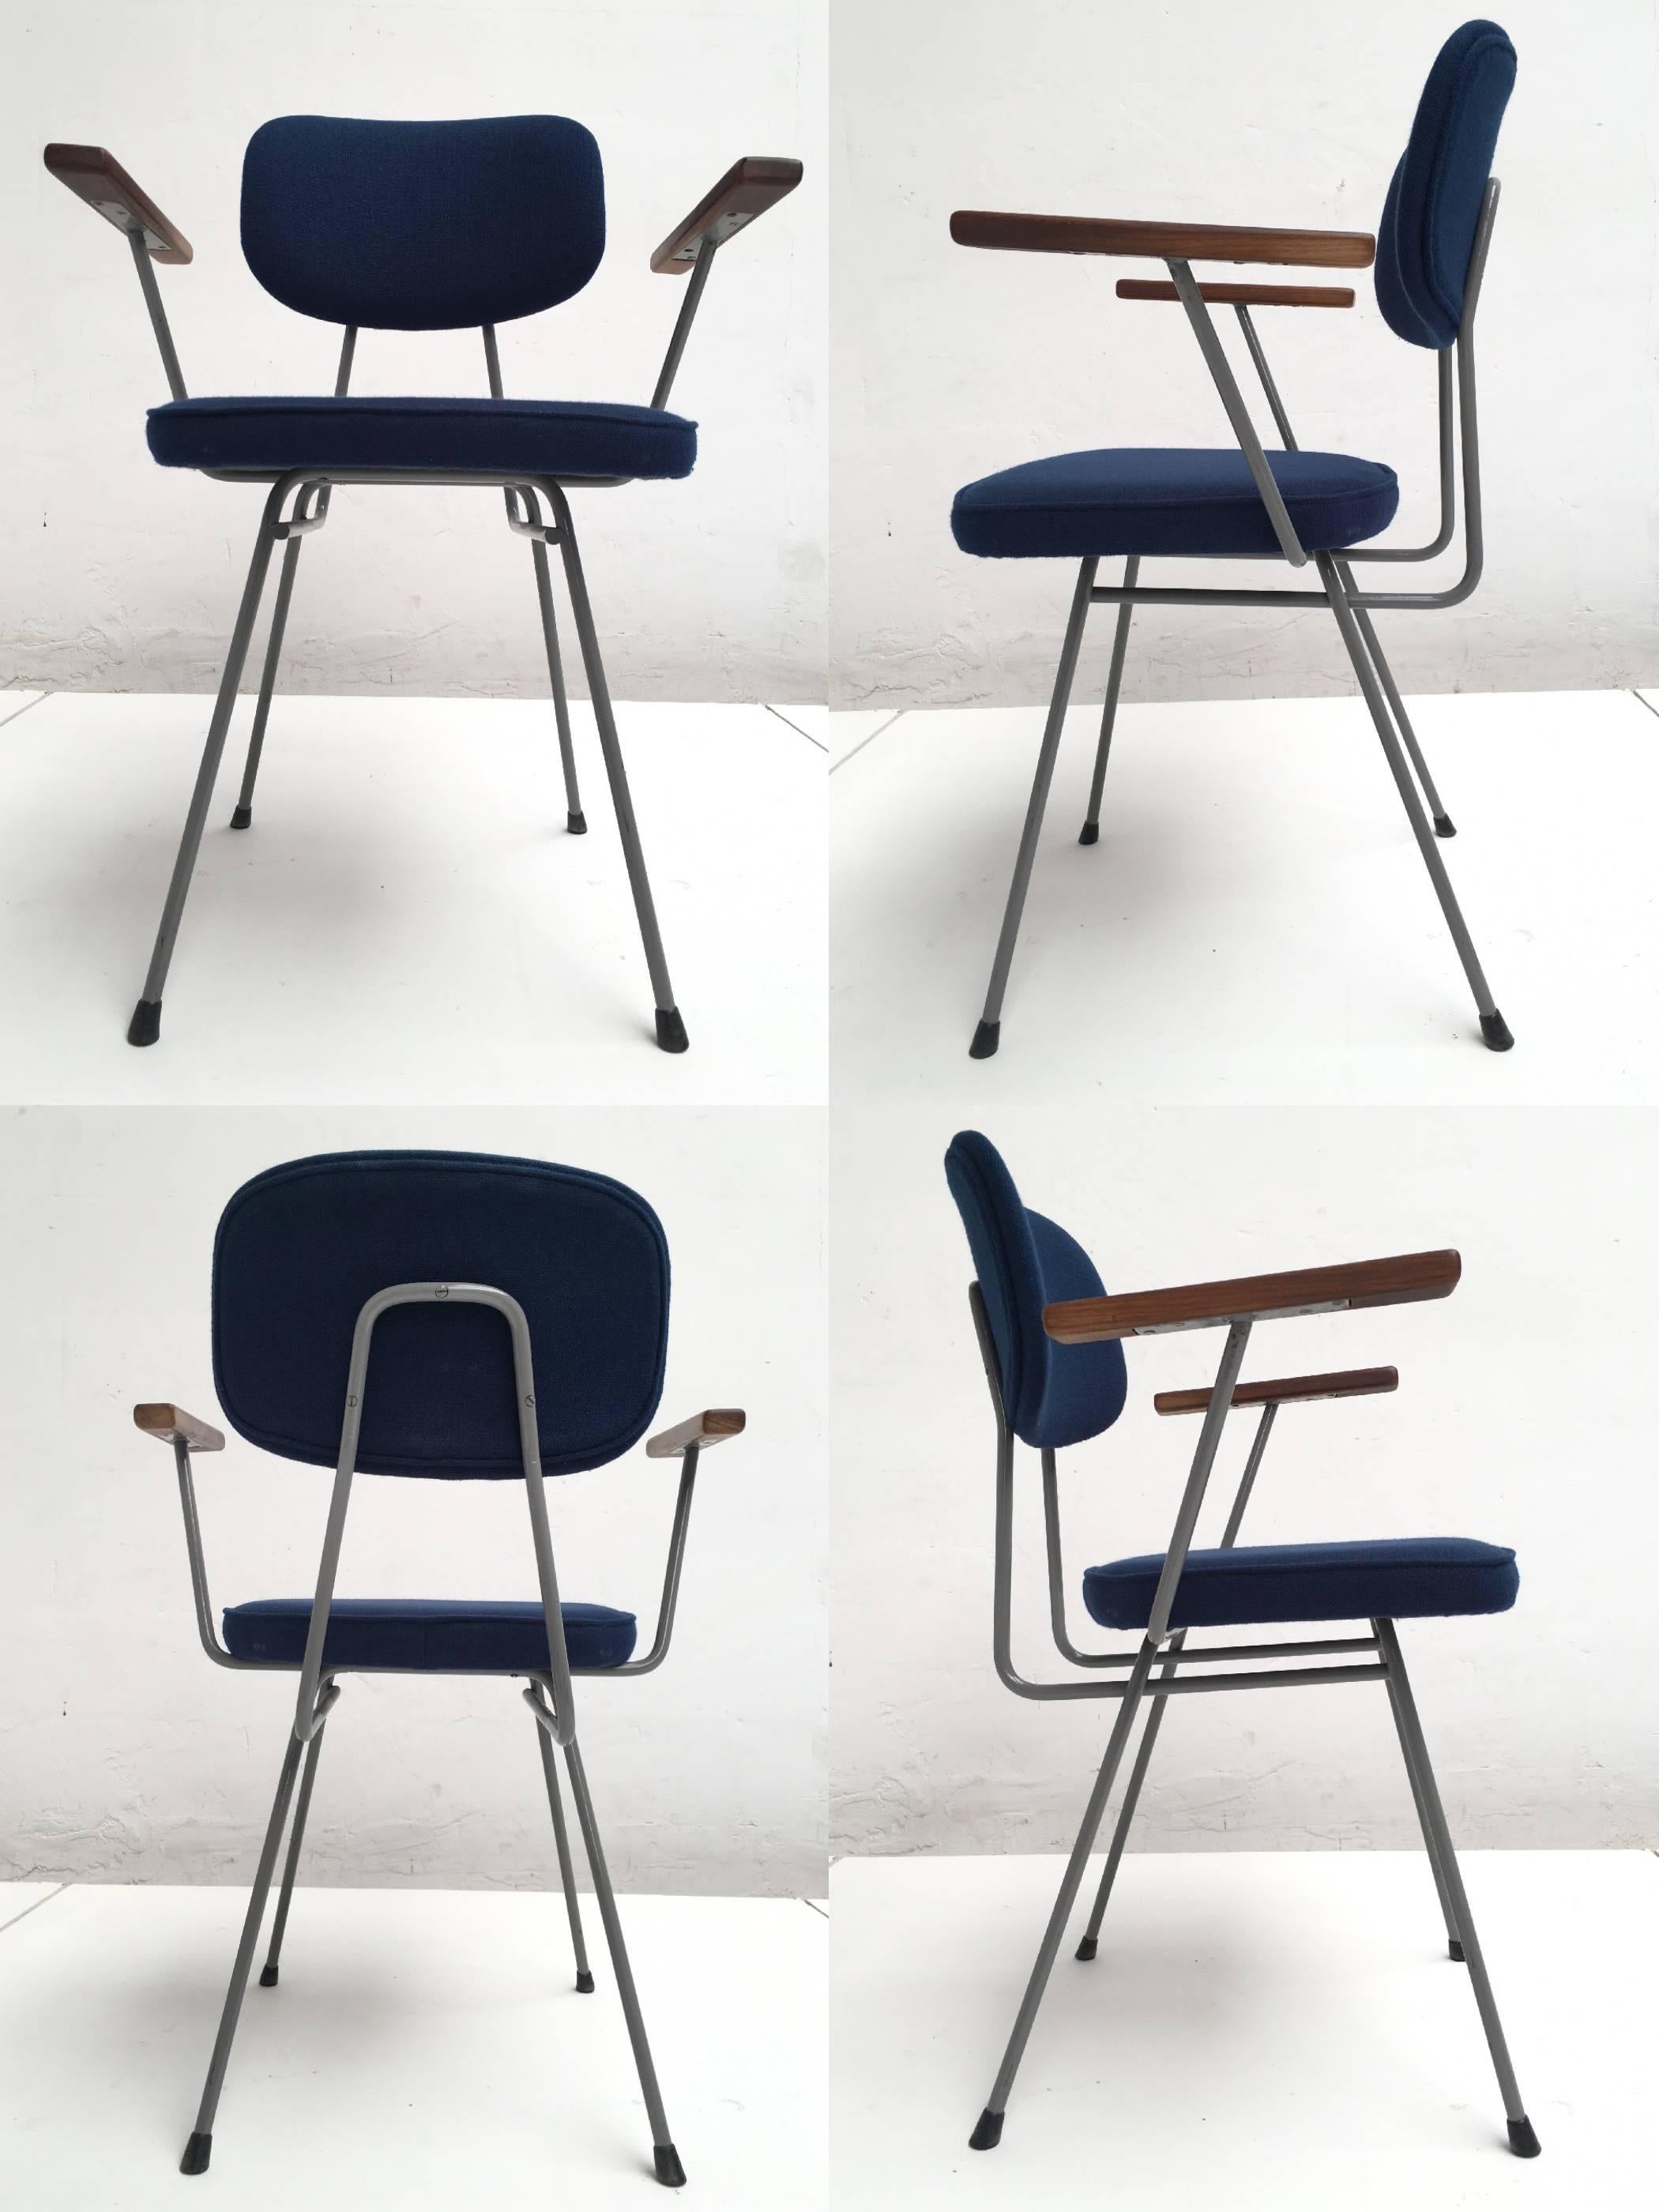 A rare set of ten armrest chairs produced by Kembo The Netherlands, early 1950s

Top quality production in solid metal grey enameled frame and petrol blue wool upholstered seat and back with carved armrests in mahogany hardwood

This set has